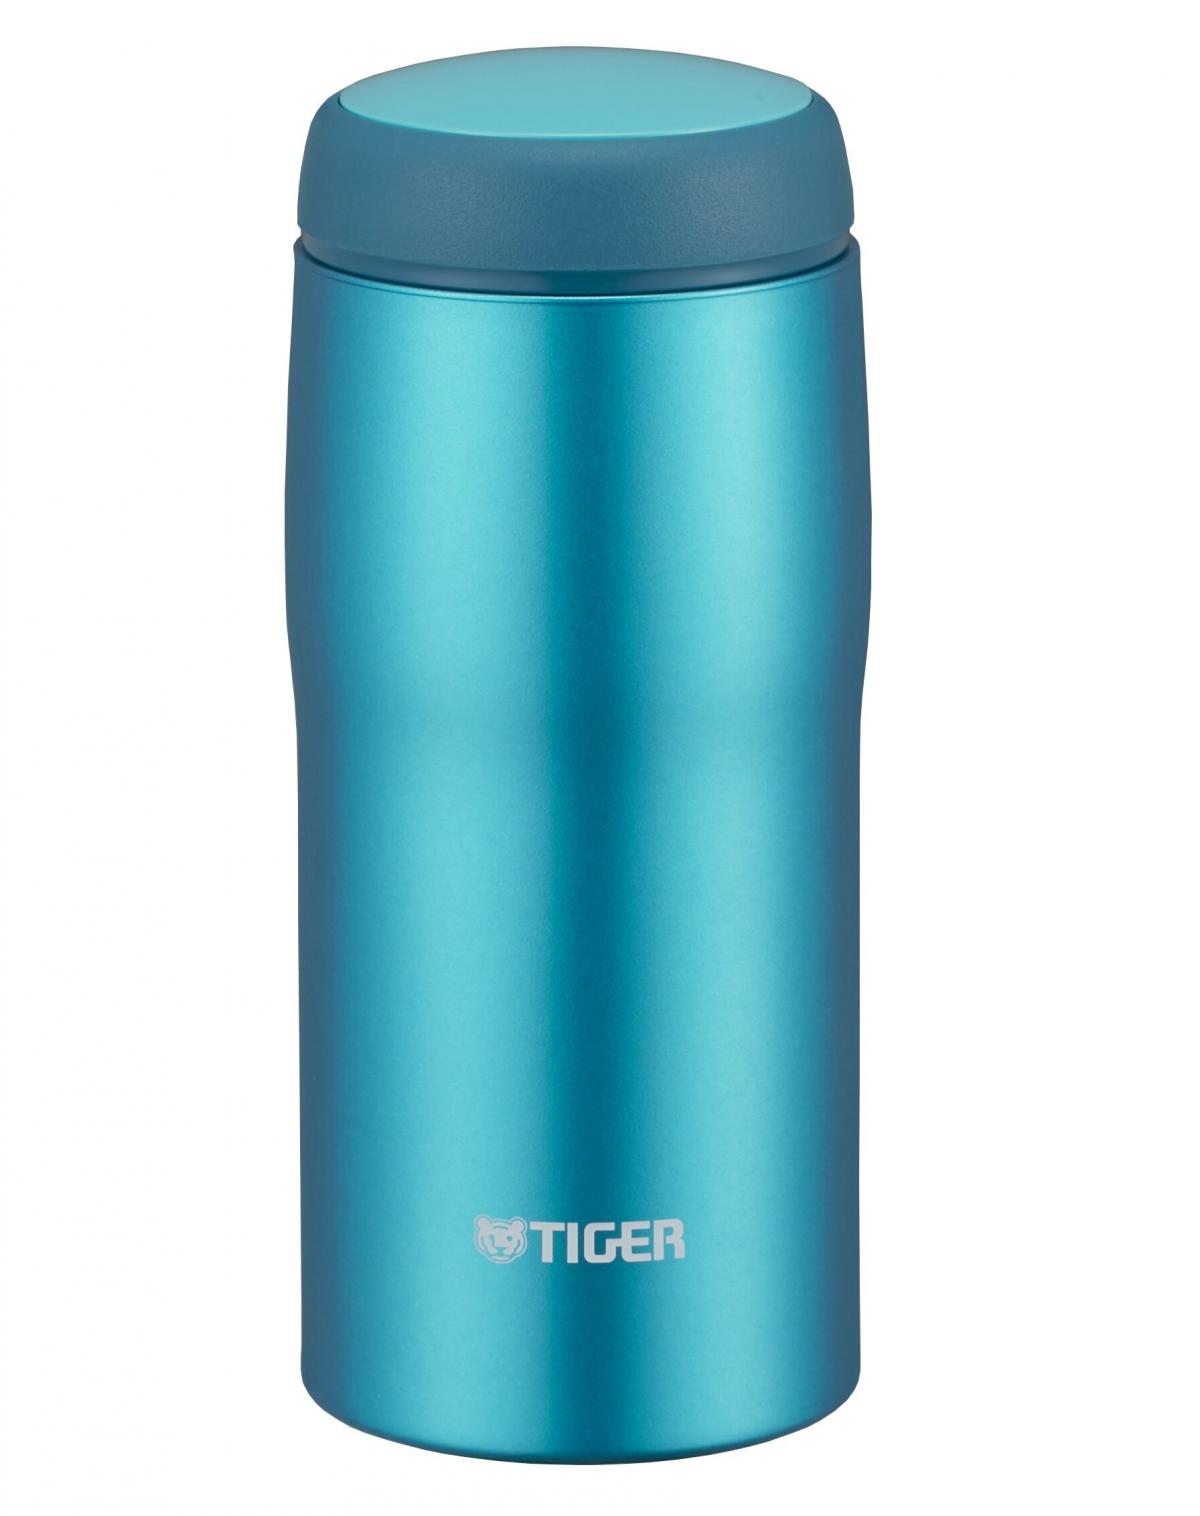 Tiger (pictured MJE-A Model) Insulated Bottles are Made in Japan